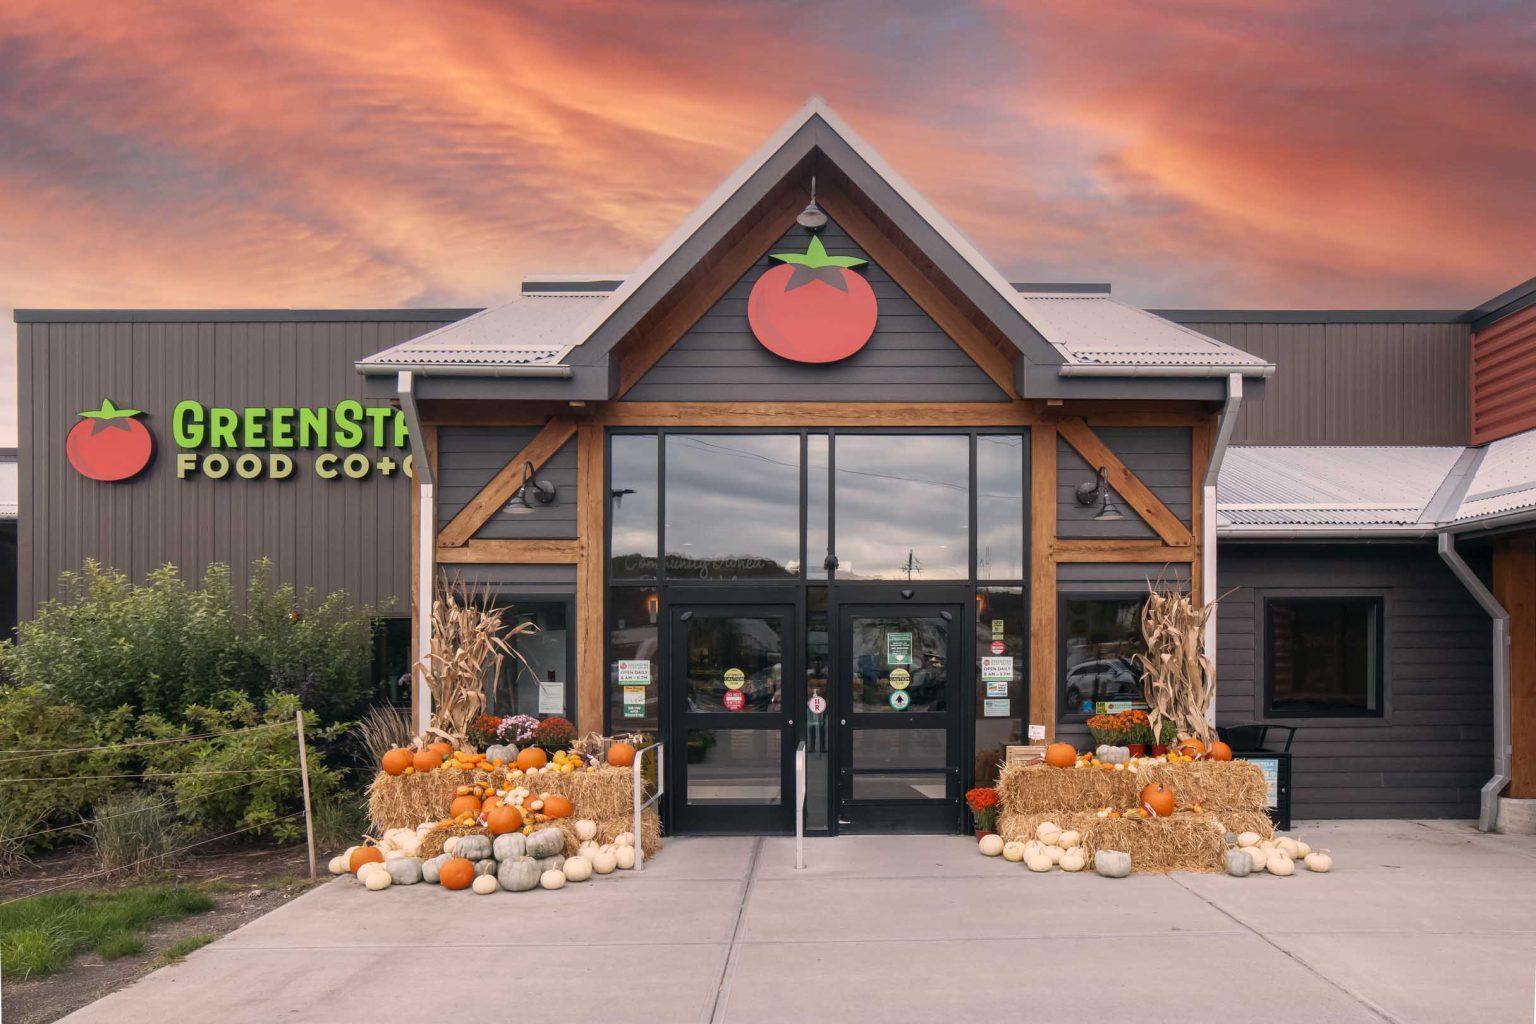 Timber Frame Grocery Store by Woodhouse, The Timber Frame Company